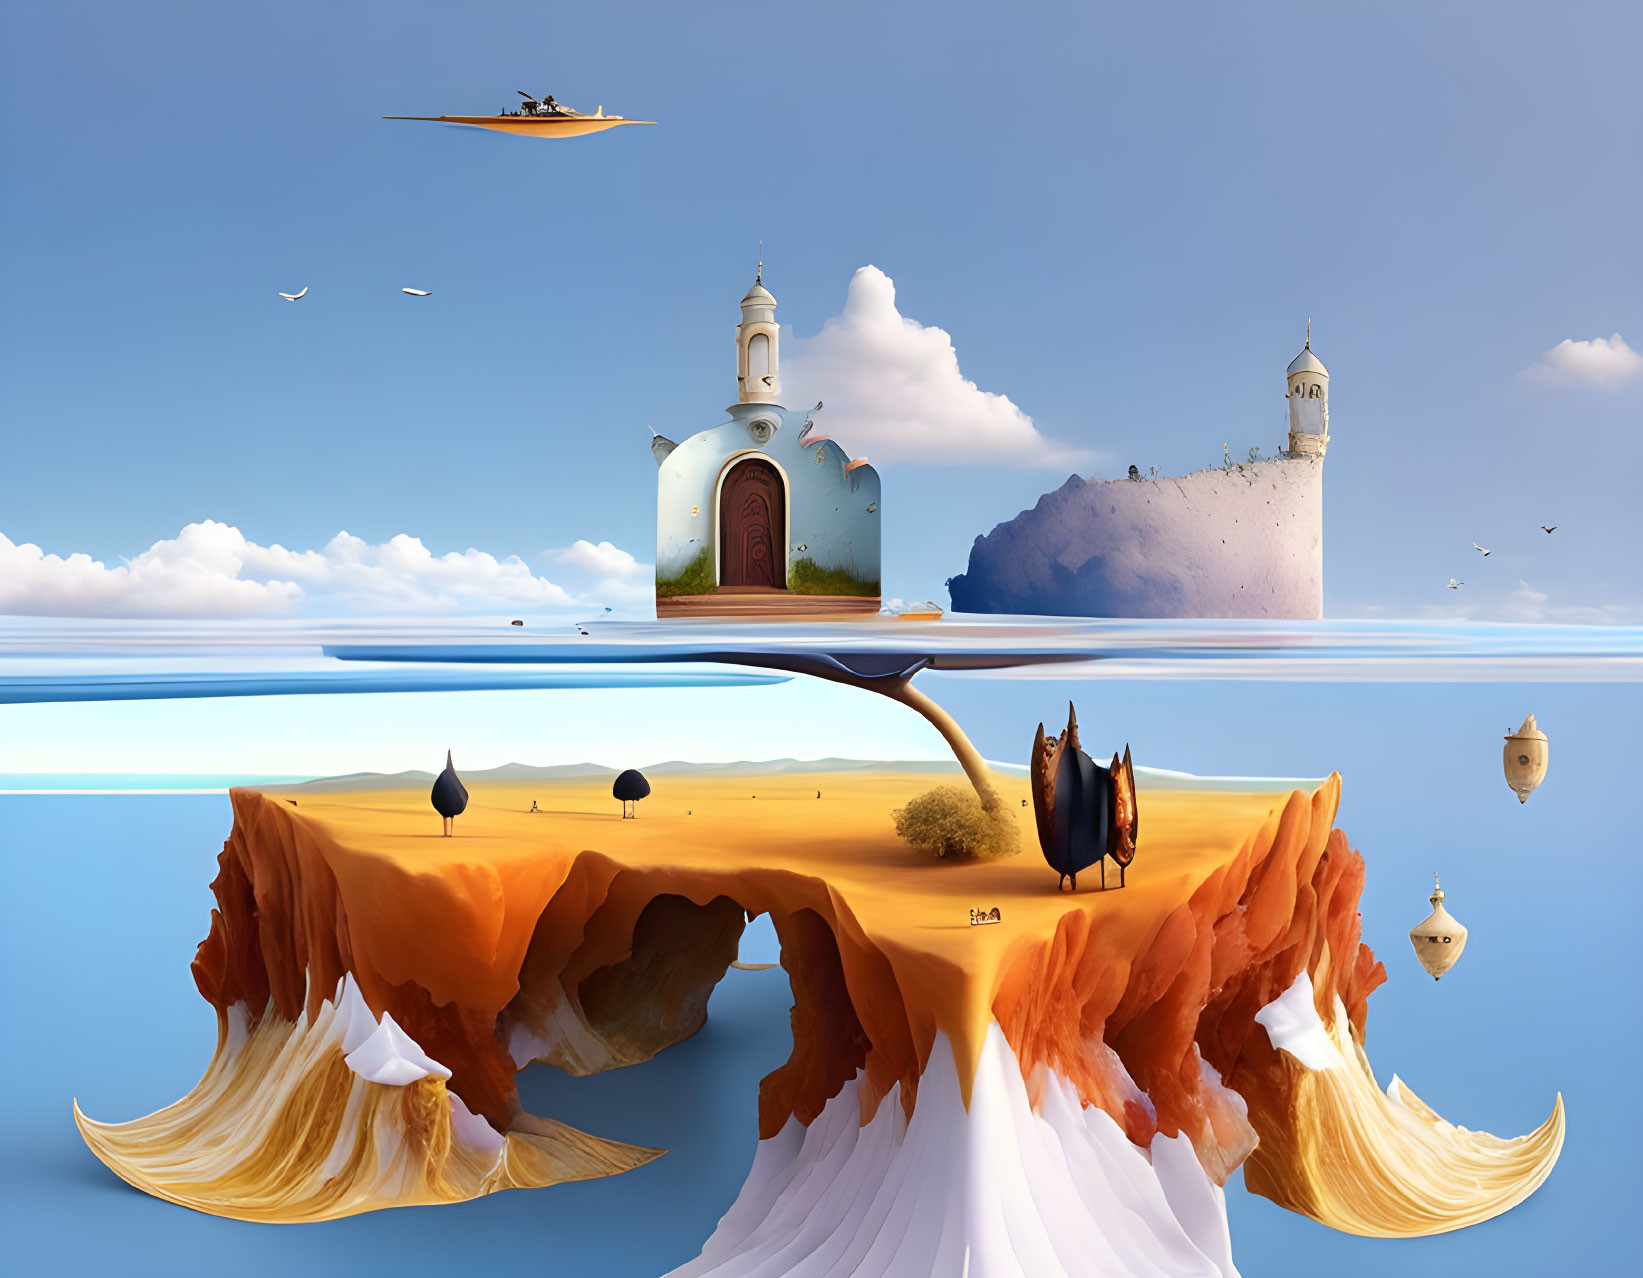 Surreal floating island with church, lighthouse, and upside-down elements in clear blue skies